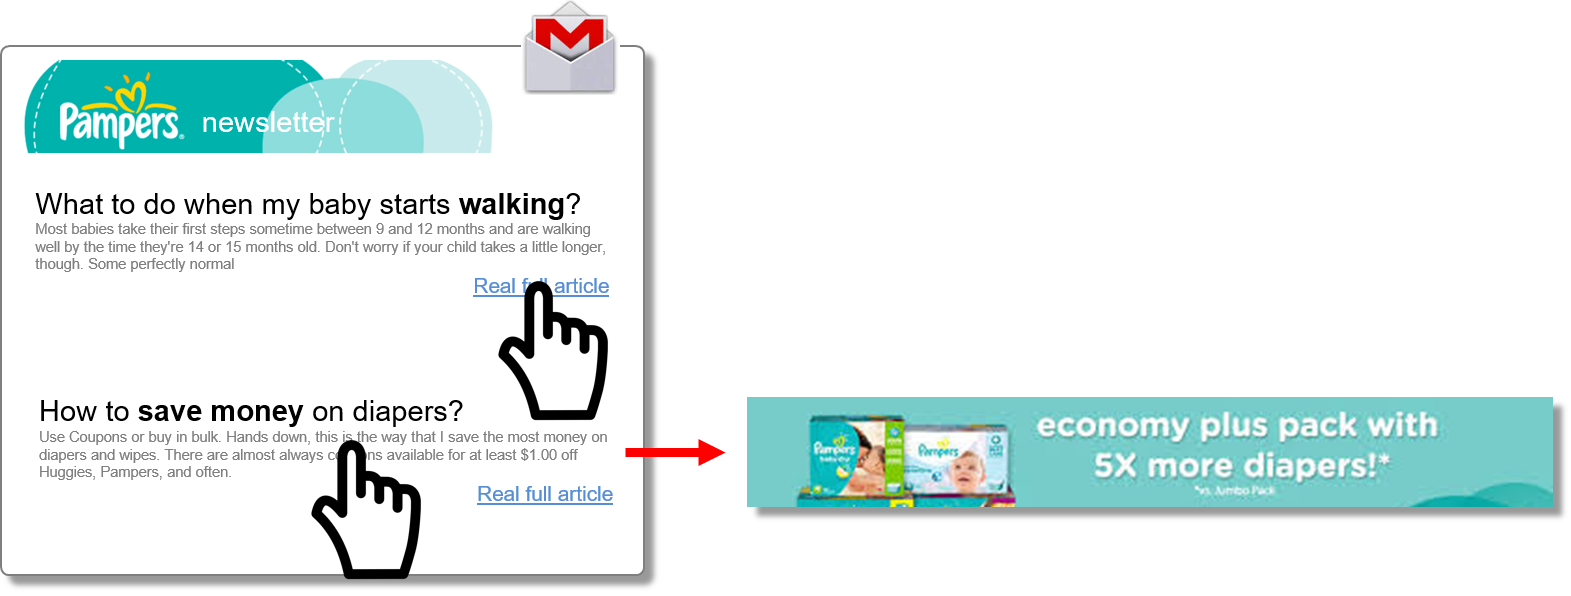 How pampers advertises their economy packs with Link Retargeting